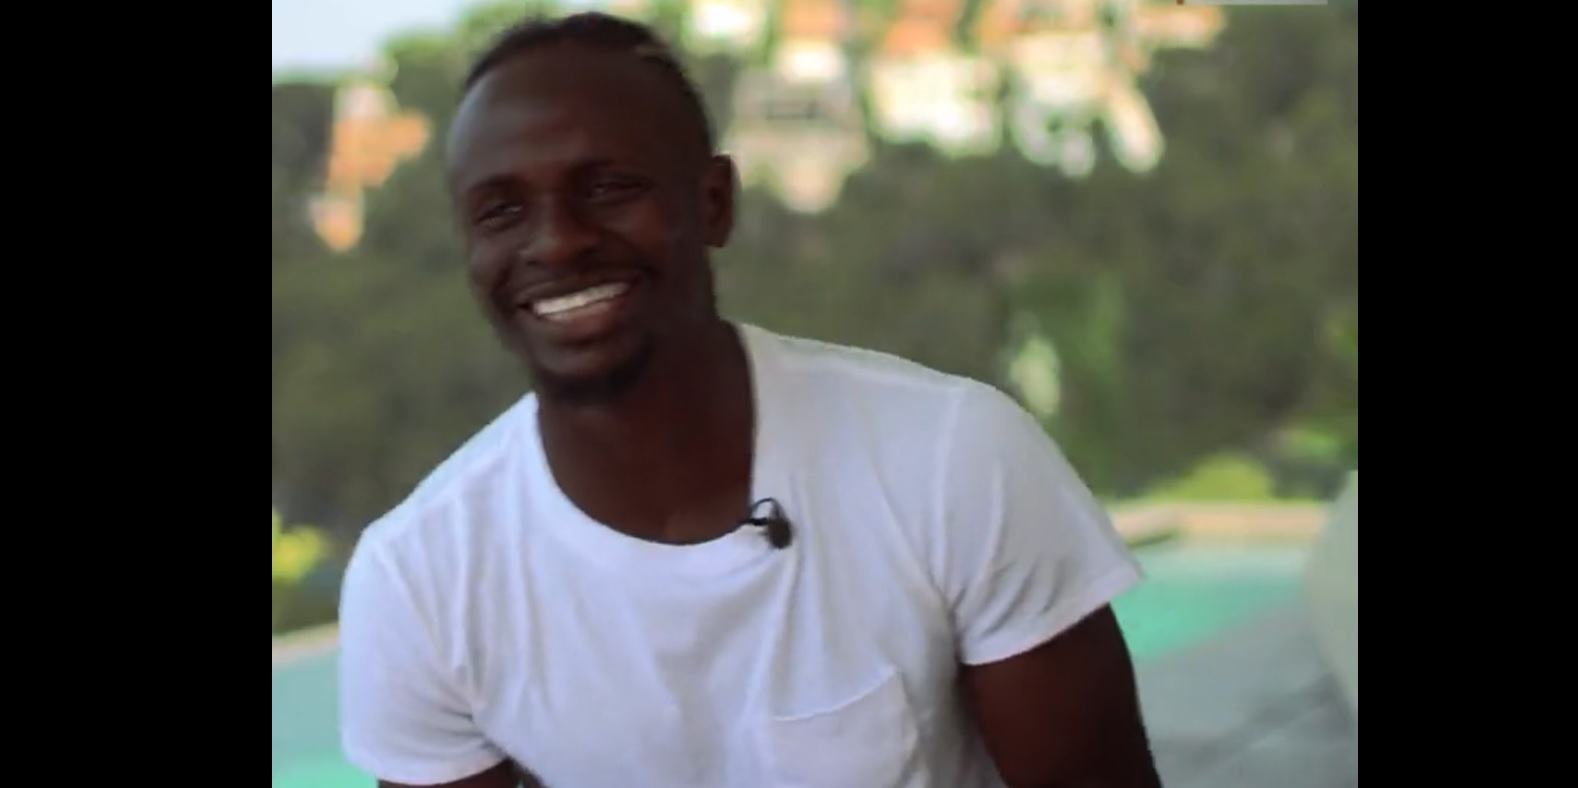 (Video) ‘How can I say?’ – Sadio Mane issues Liverpool promise in emotional goodbye message to fans after completing Bayern transfer